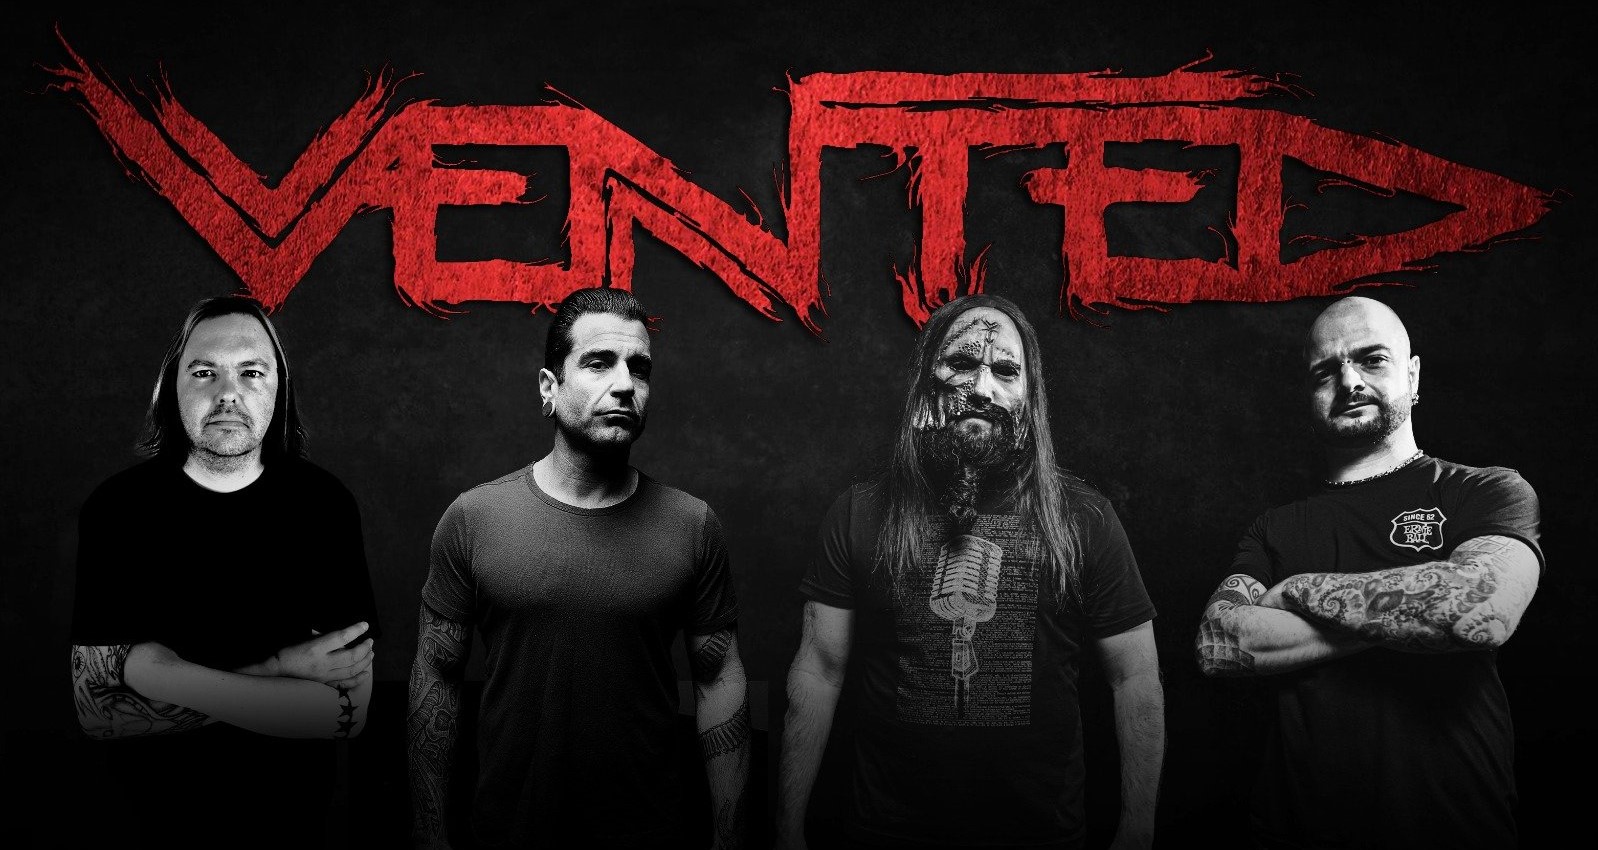 VENTED release crushing new single “My Desire”.